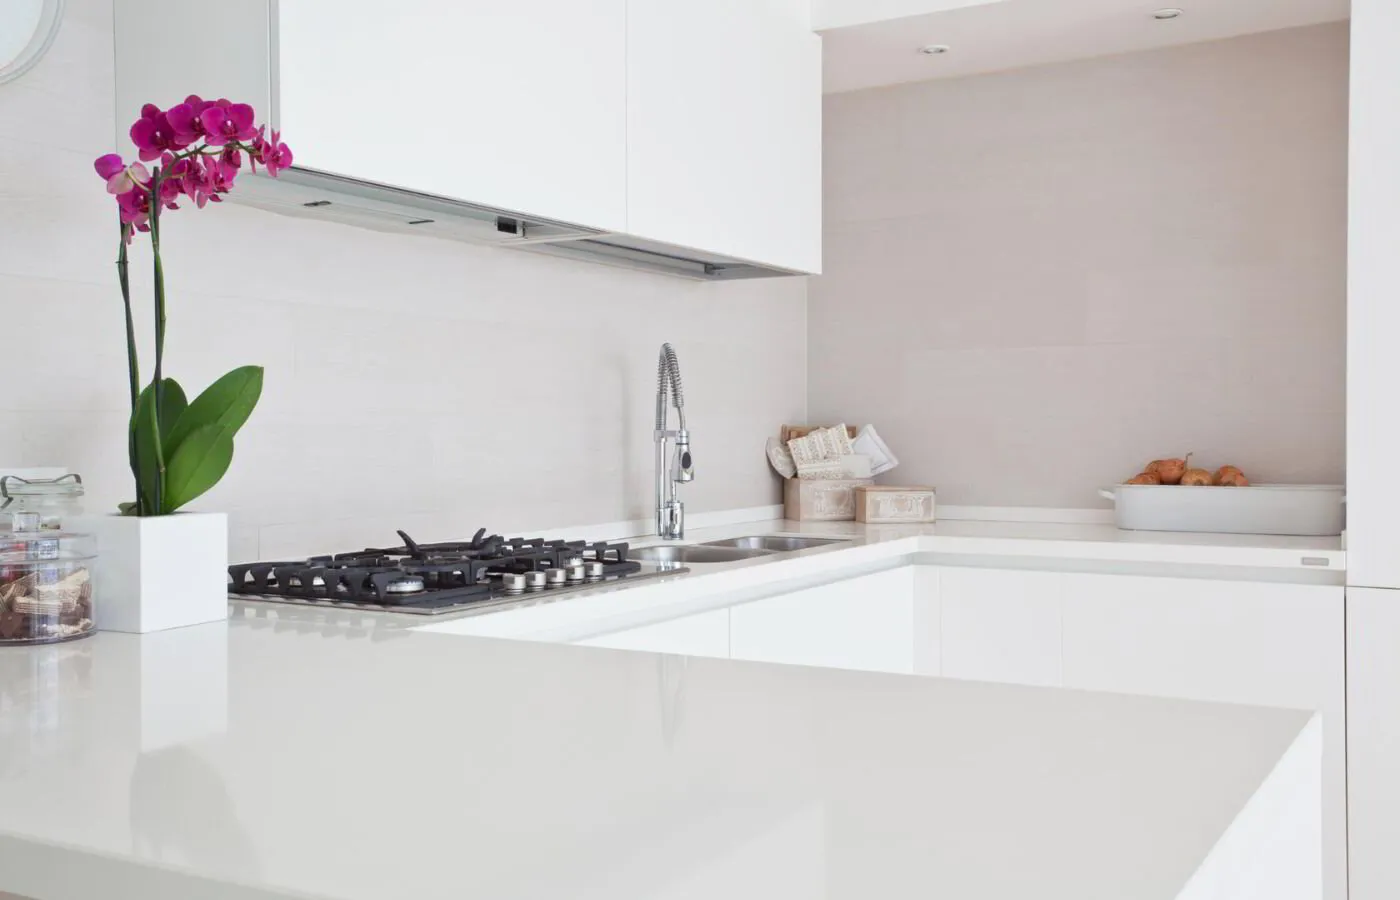 How to Clean Quartz Countertops and Remove Tough Stains